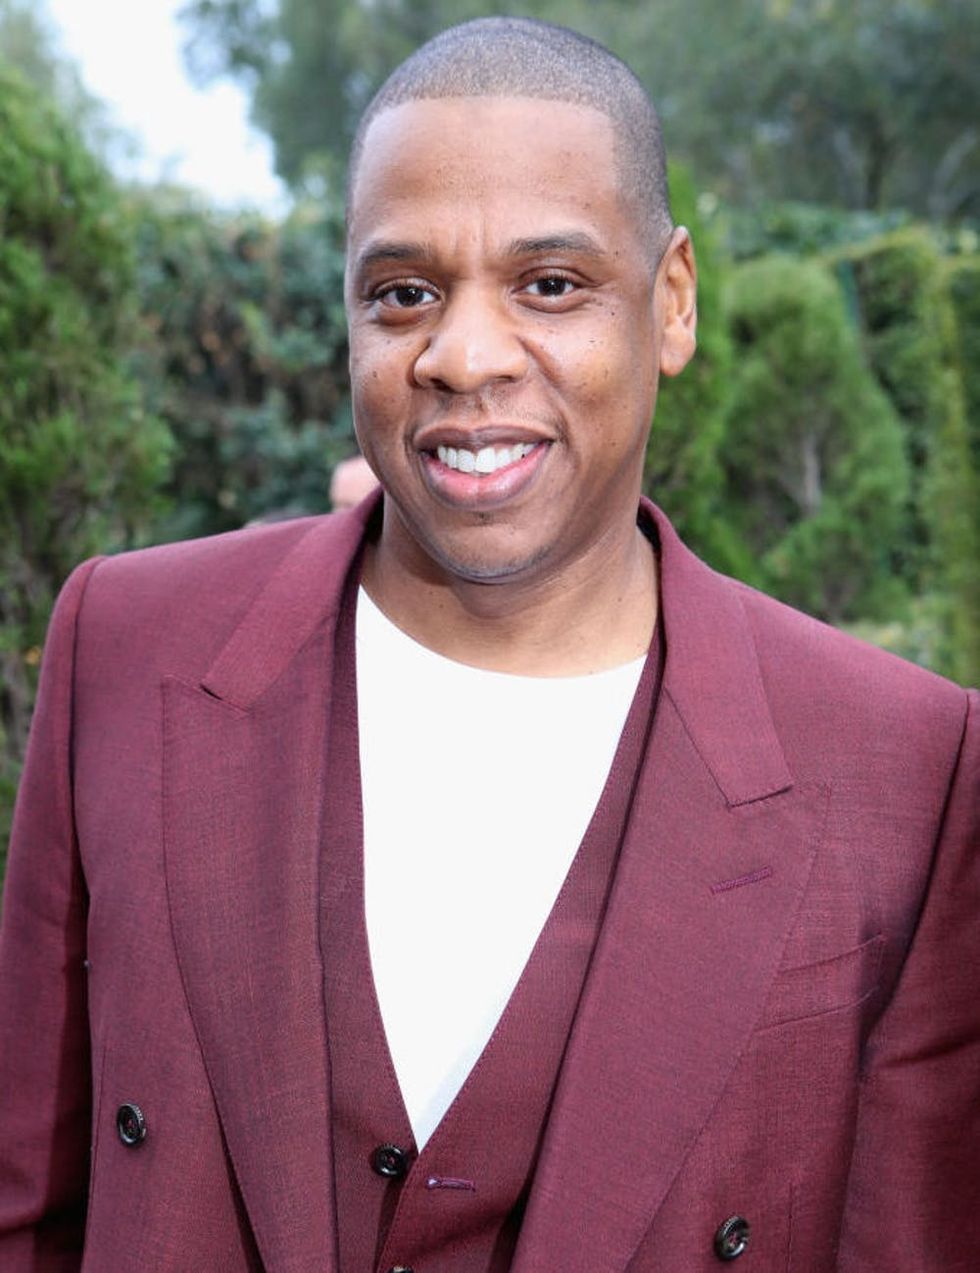 Jay Z fans have a theory about his 4:44 album title